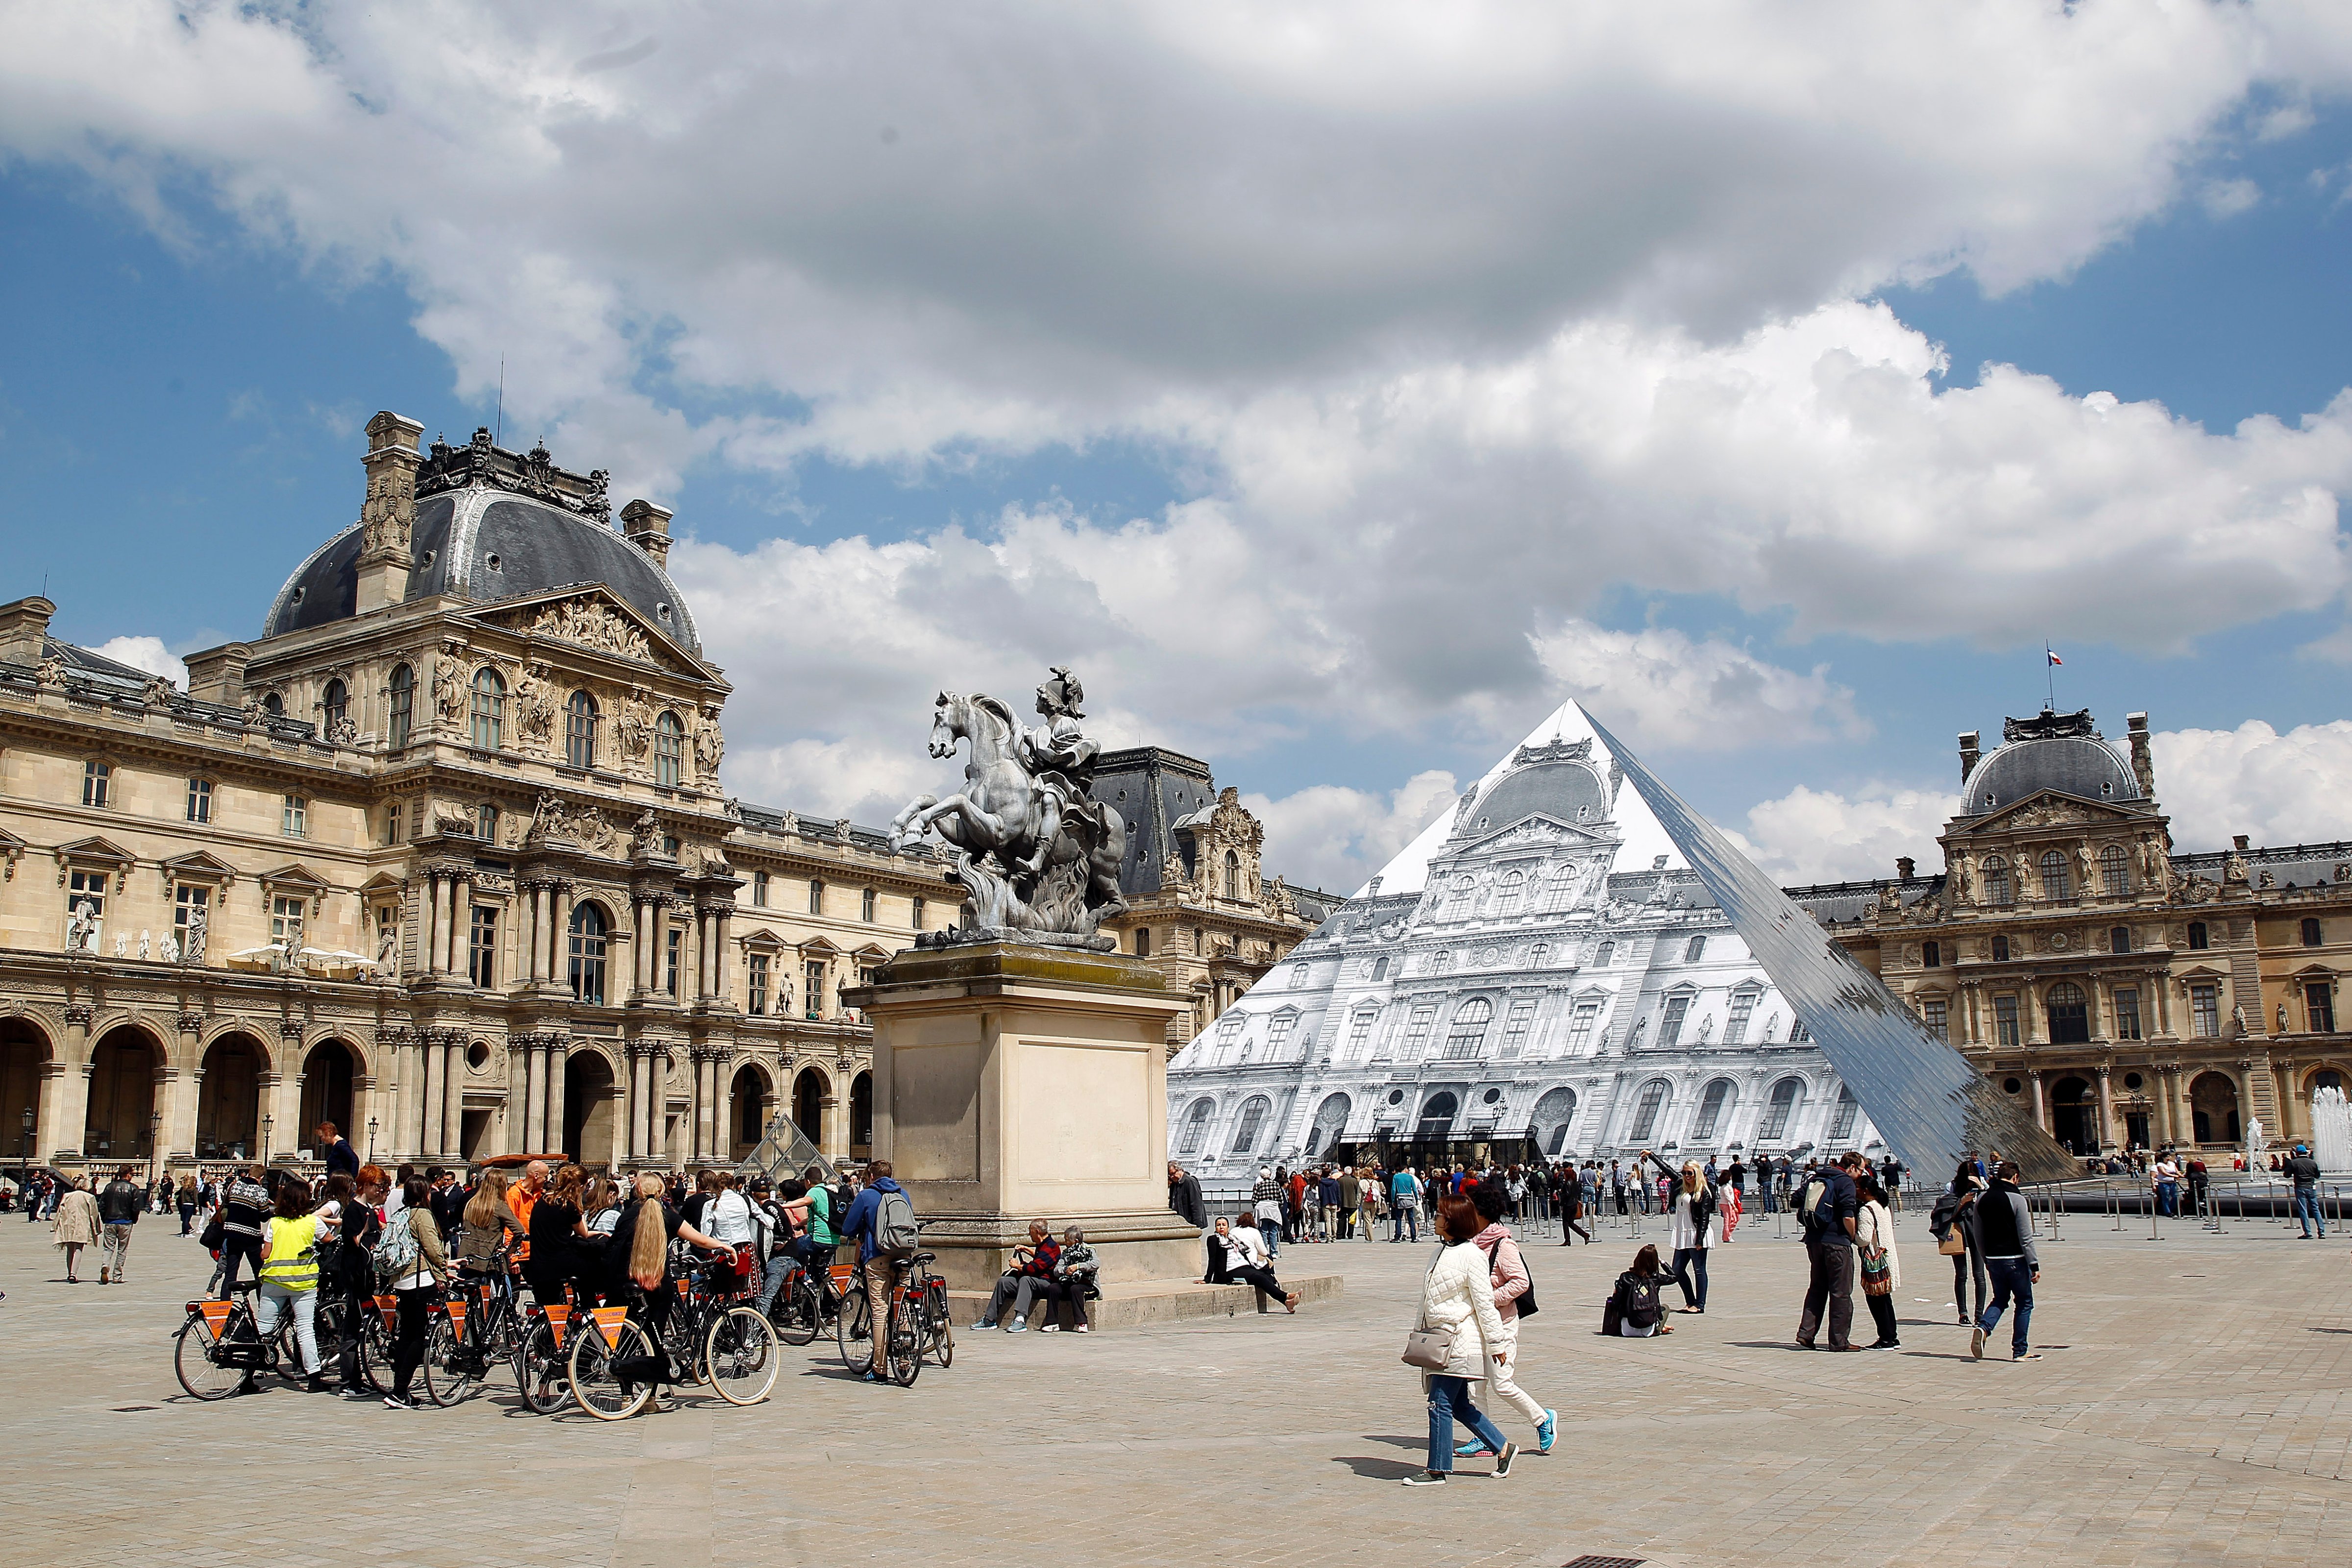 Artwork of French street artist and photographer JR is displayed on the Louvre Pyramid in Paris, May 25, 2016. (Chesnot—Getty Images)